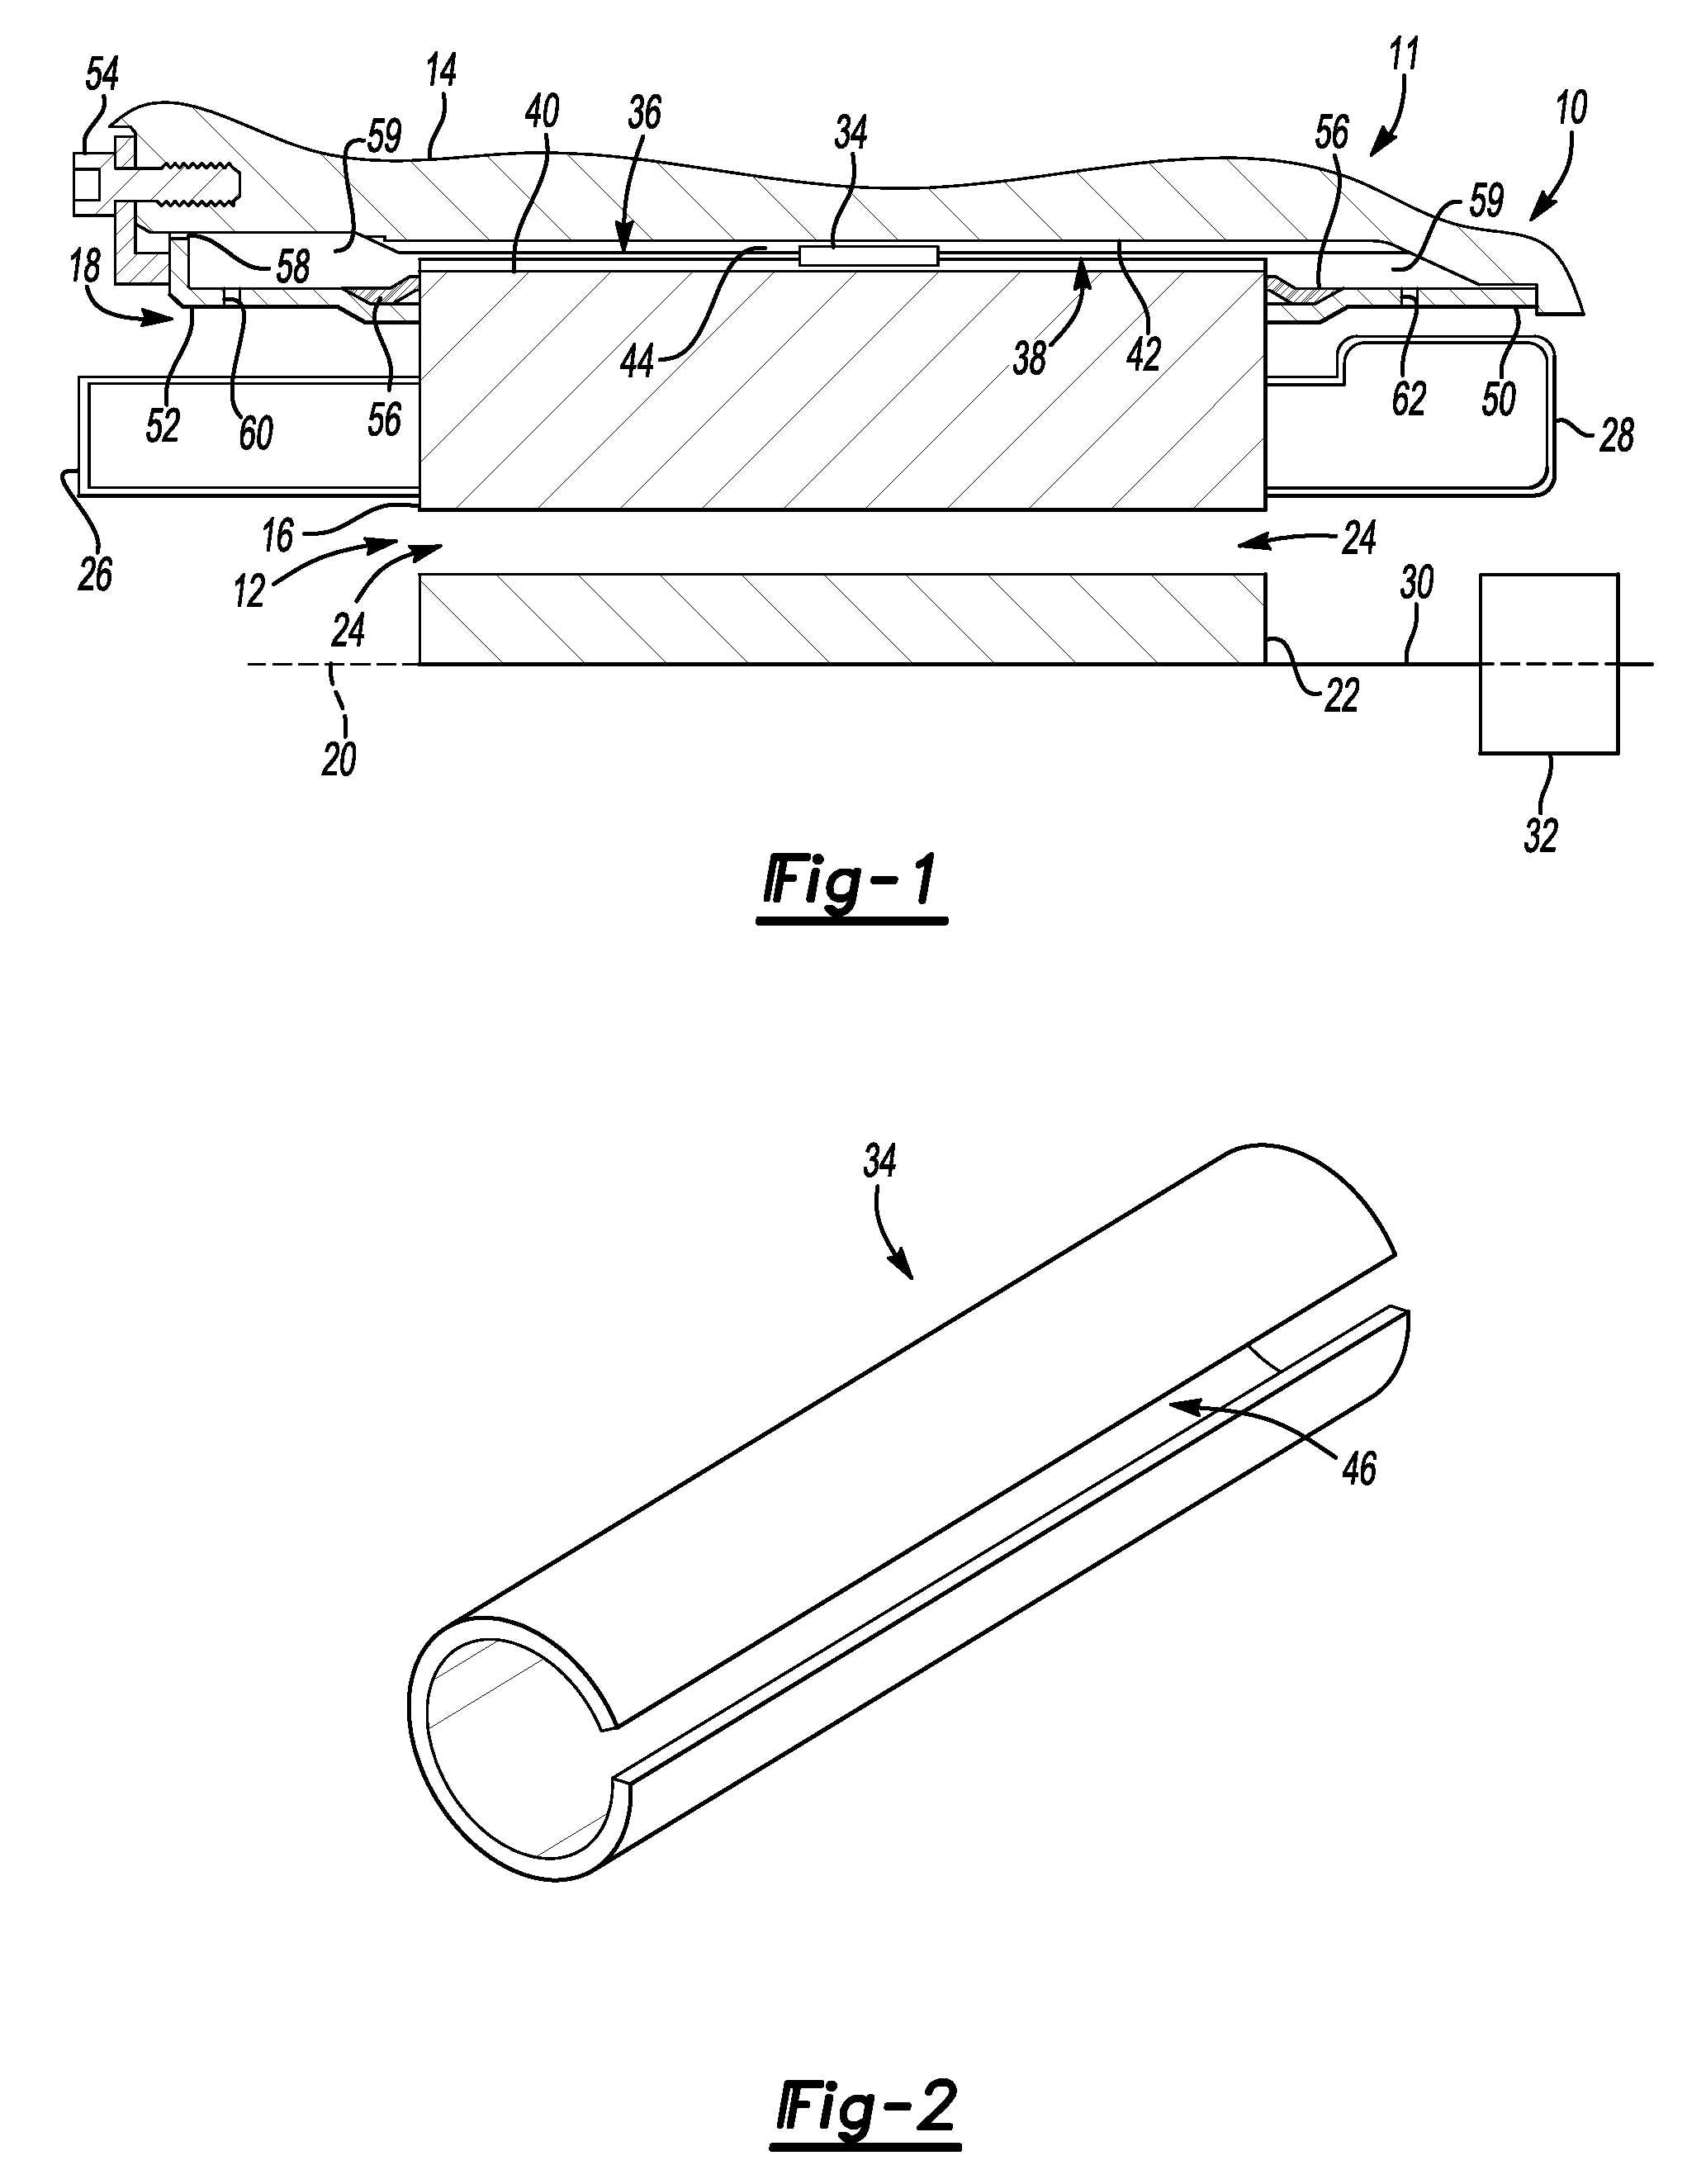 Electric motor assembly with stator mounted in vehicle powertrain housing and method